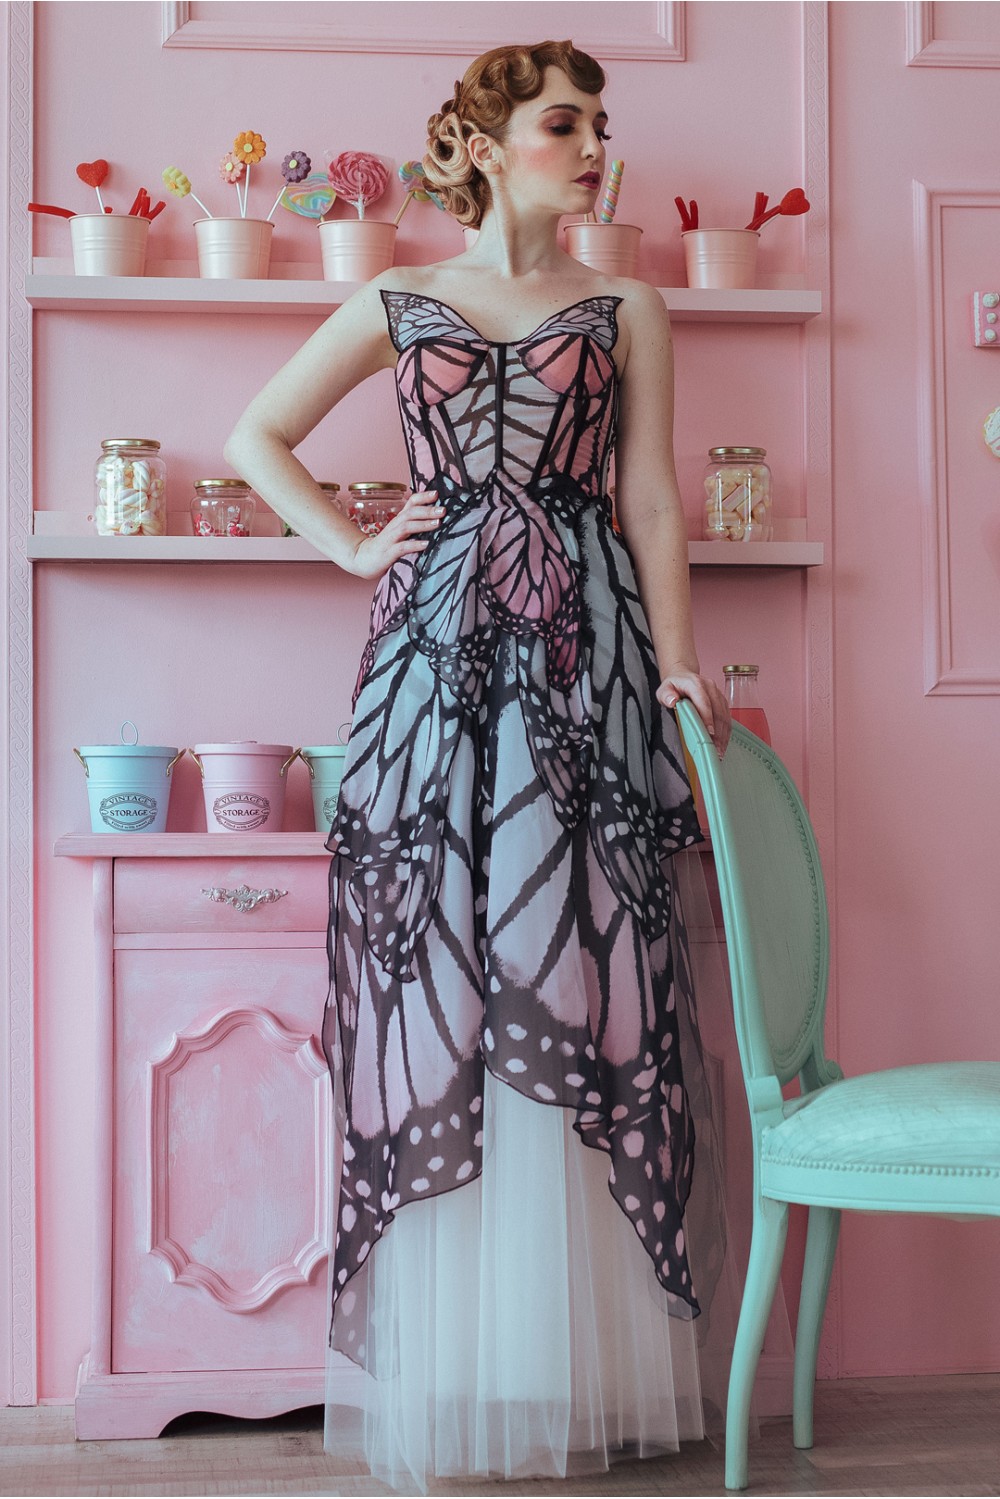 The Absolutely Stunning Dresses And Corsets Inspired By Butterfly Wings Of Bibian Blue 15